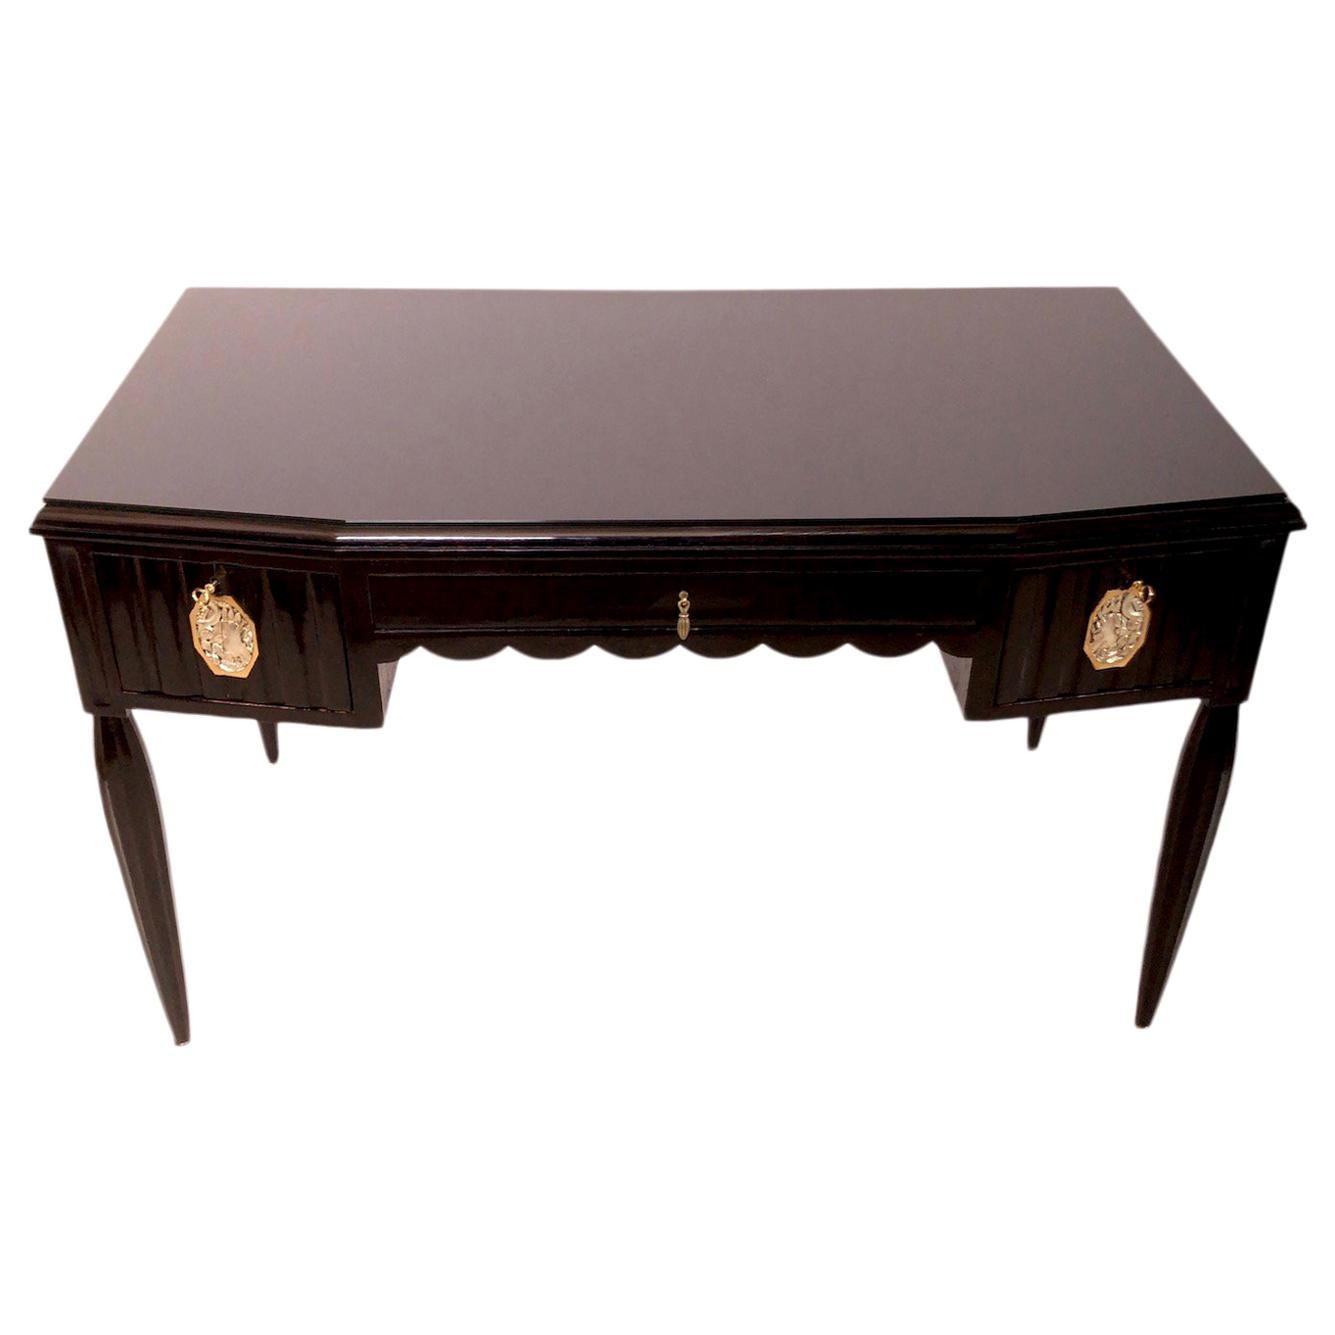 Black Art Deco Desk with Silver and Golden Art Deco Pattern and Channeled Legs For Sale